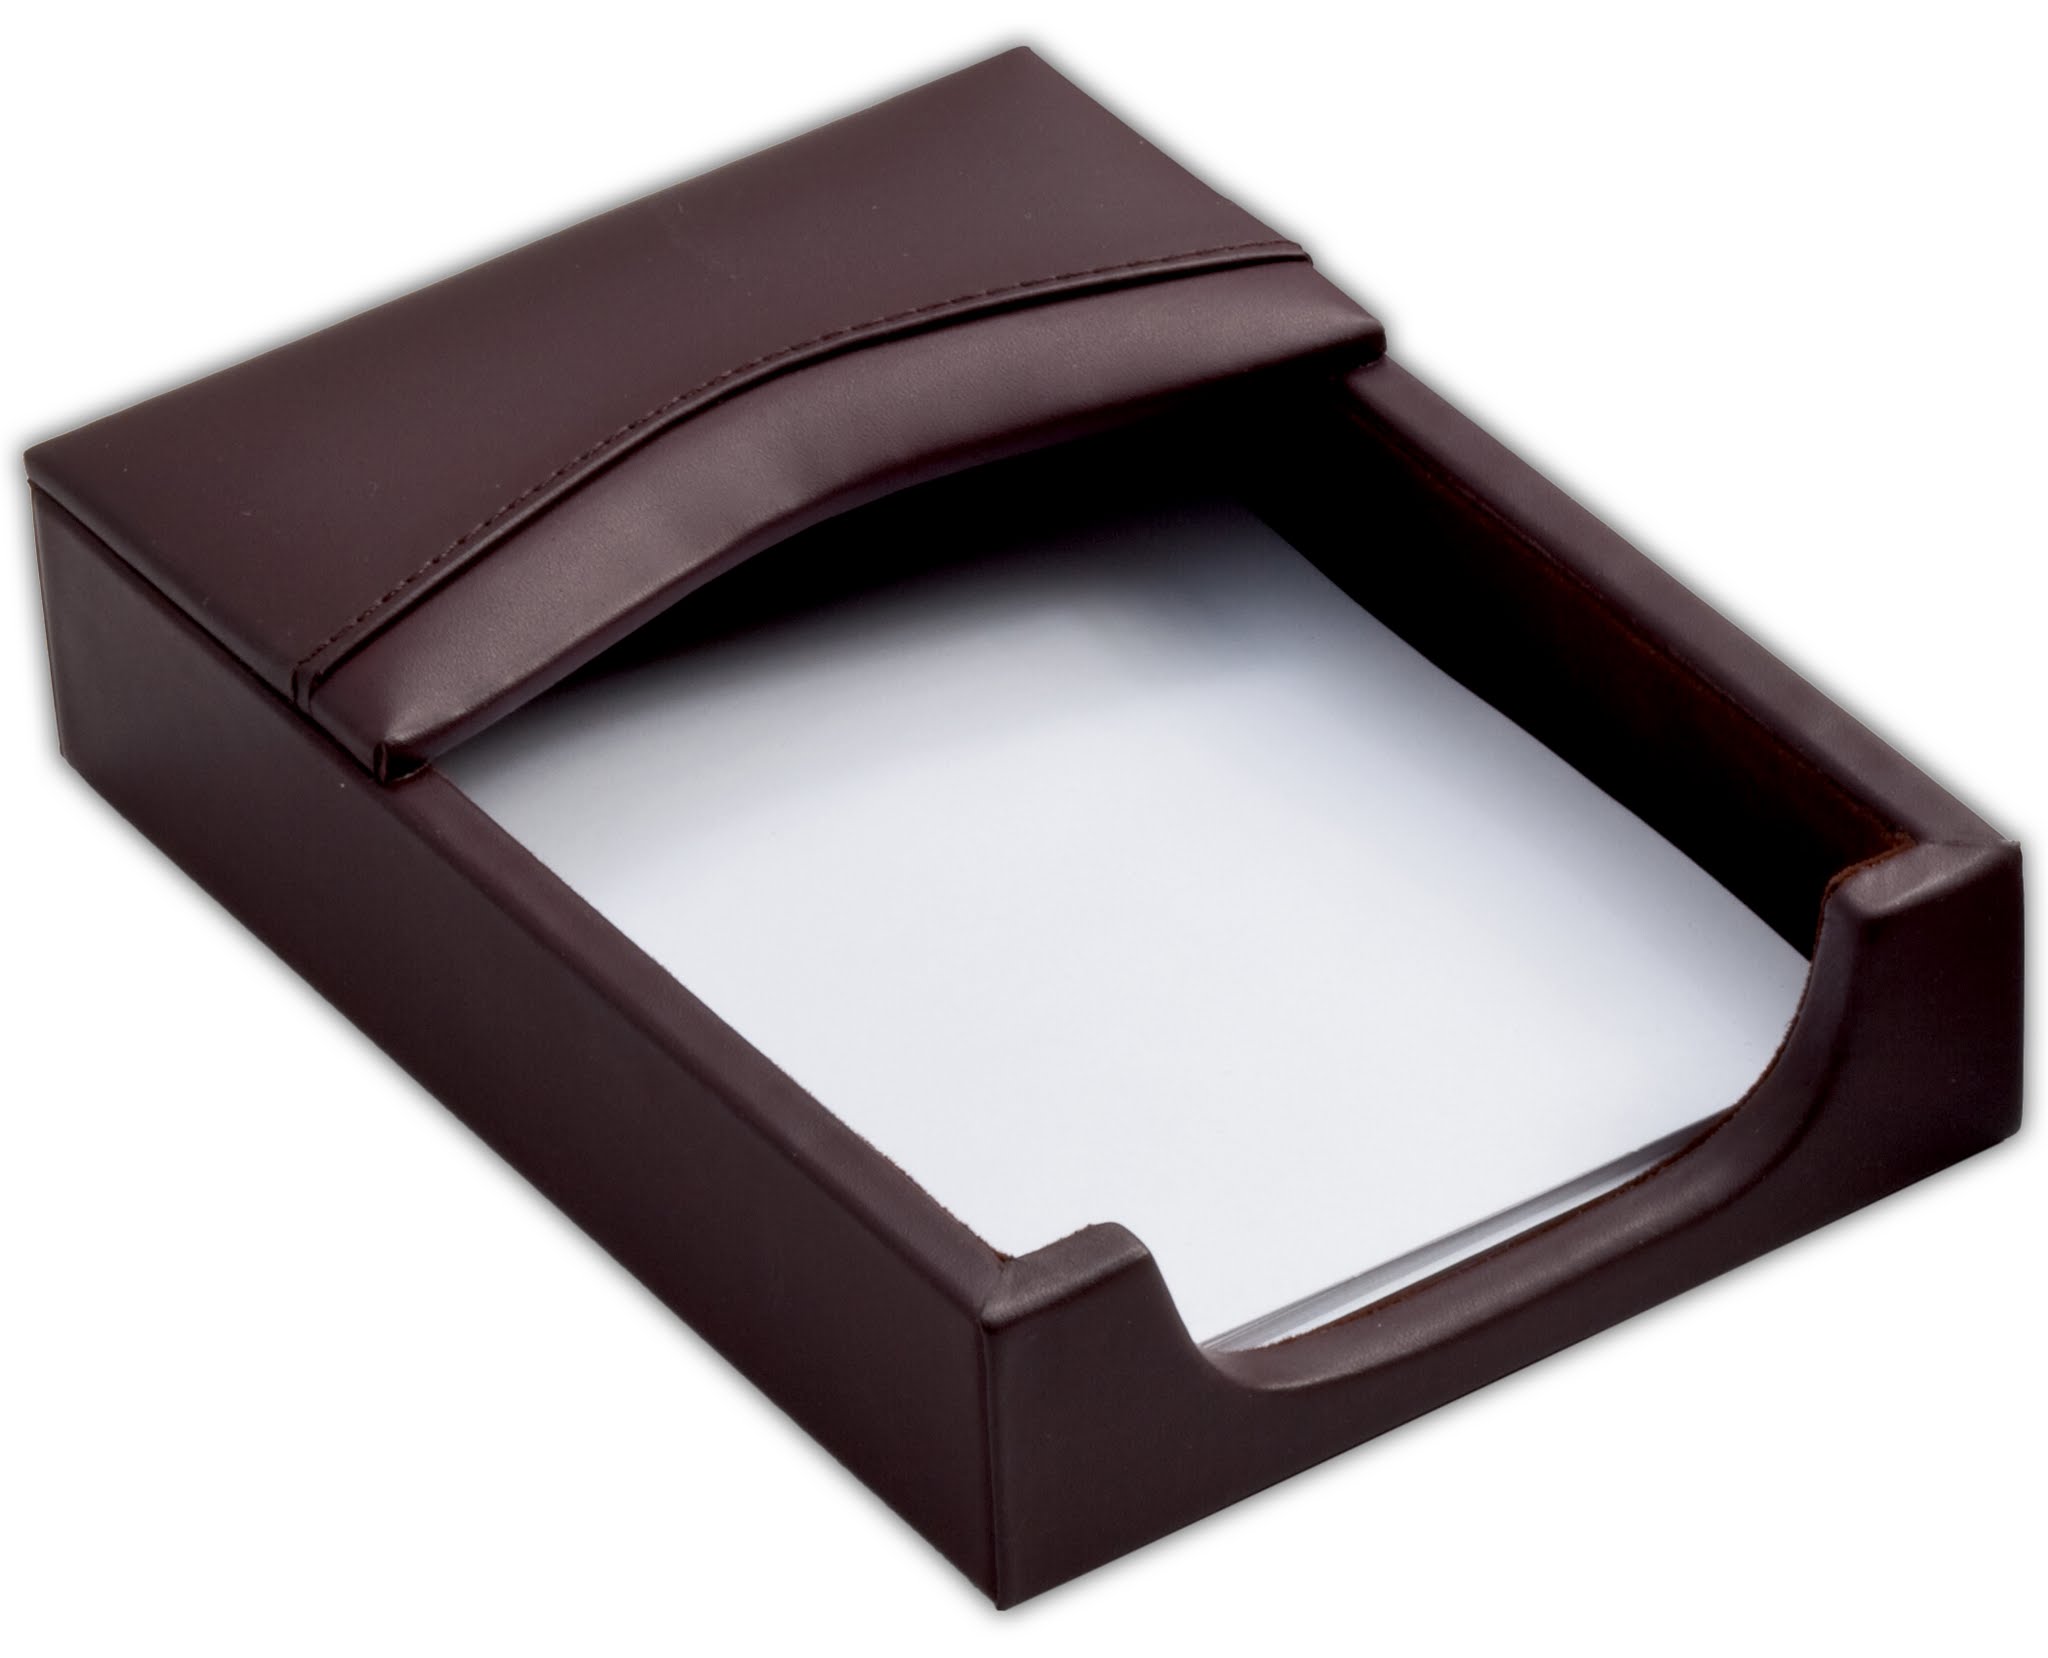 Chocolate Brown Leather 4 x 6 Memo Holder - image 1 of 2